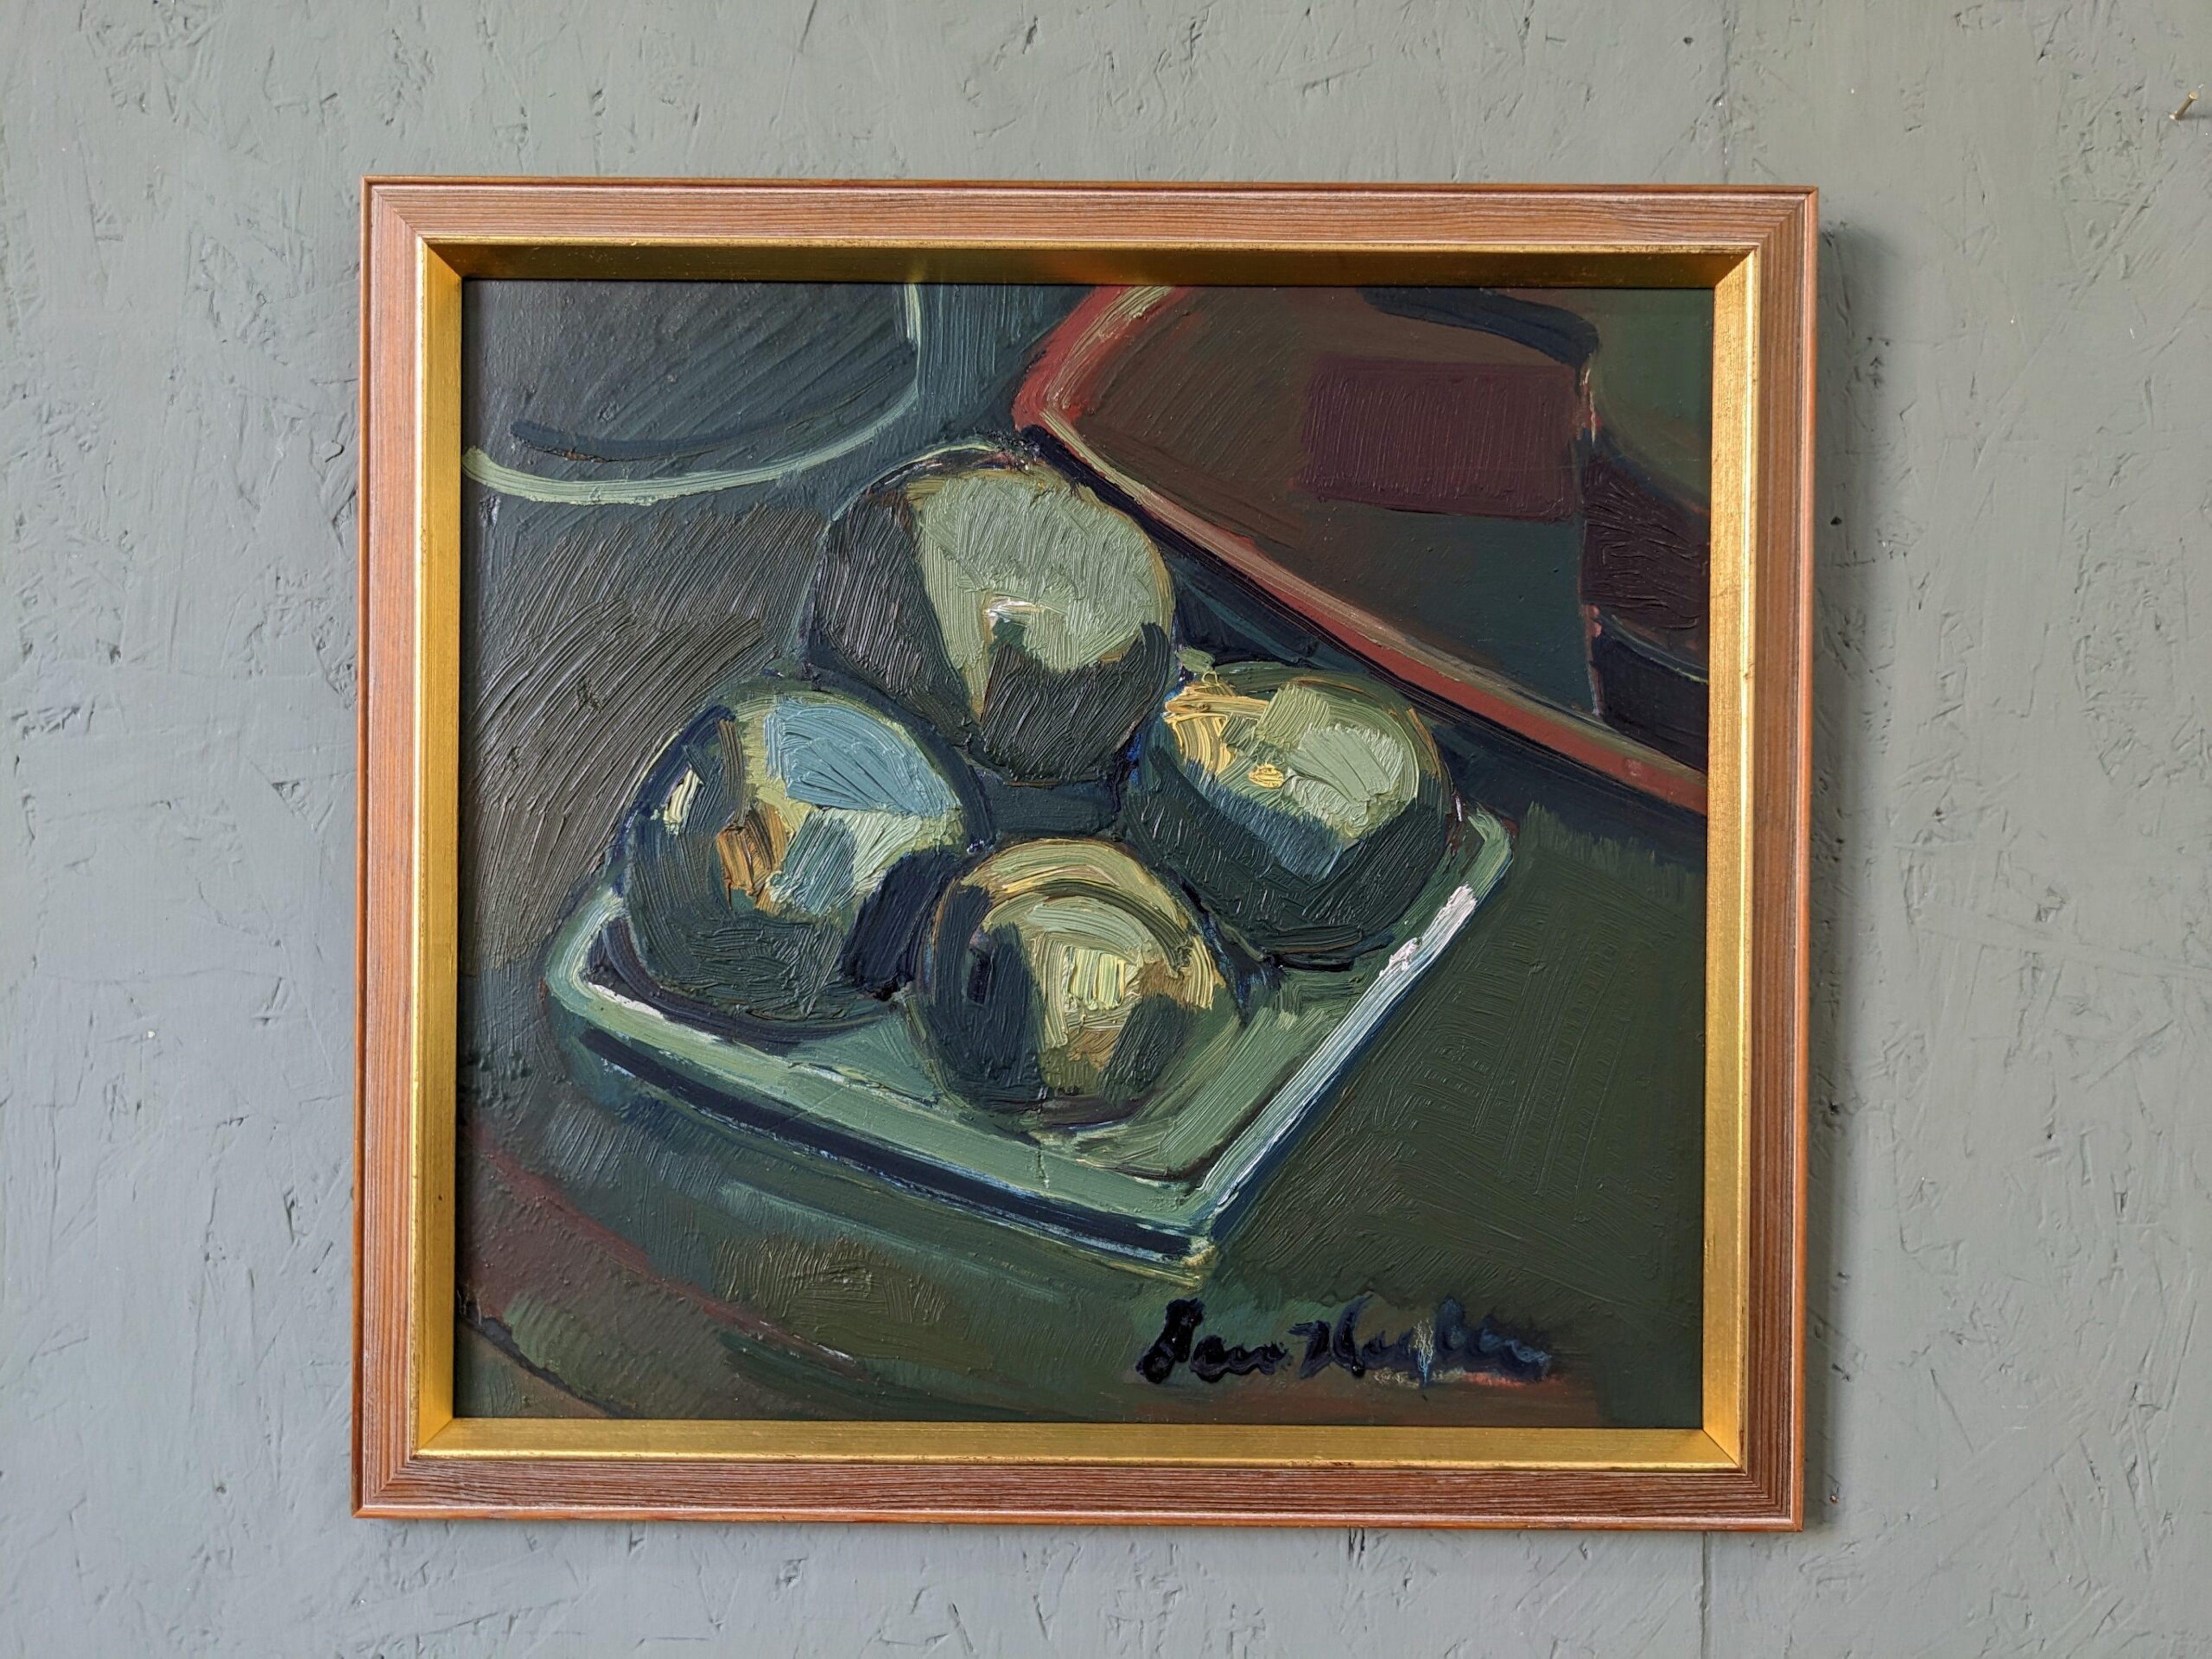 GREEN APPLES
Size:  39.5 x 43 cm (including frame)
Oil on Board

An expressive and beautifully textured mid-century still life oil composition, that revolves around a plate of 4 green apples resting on a dark green tabletop.

The artist has